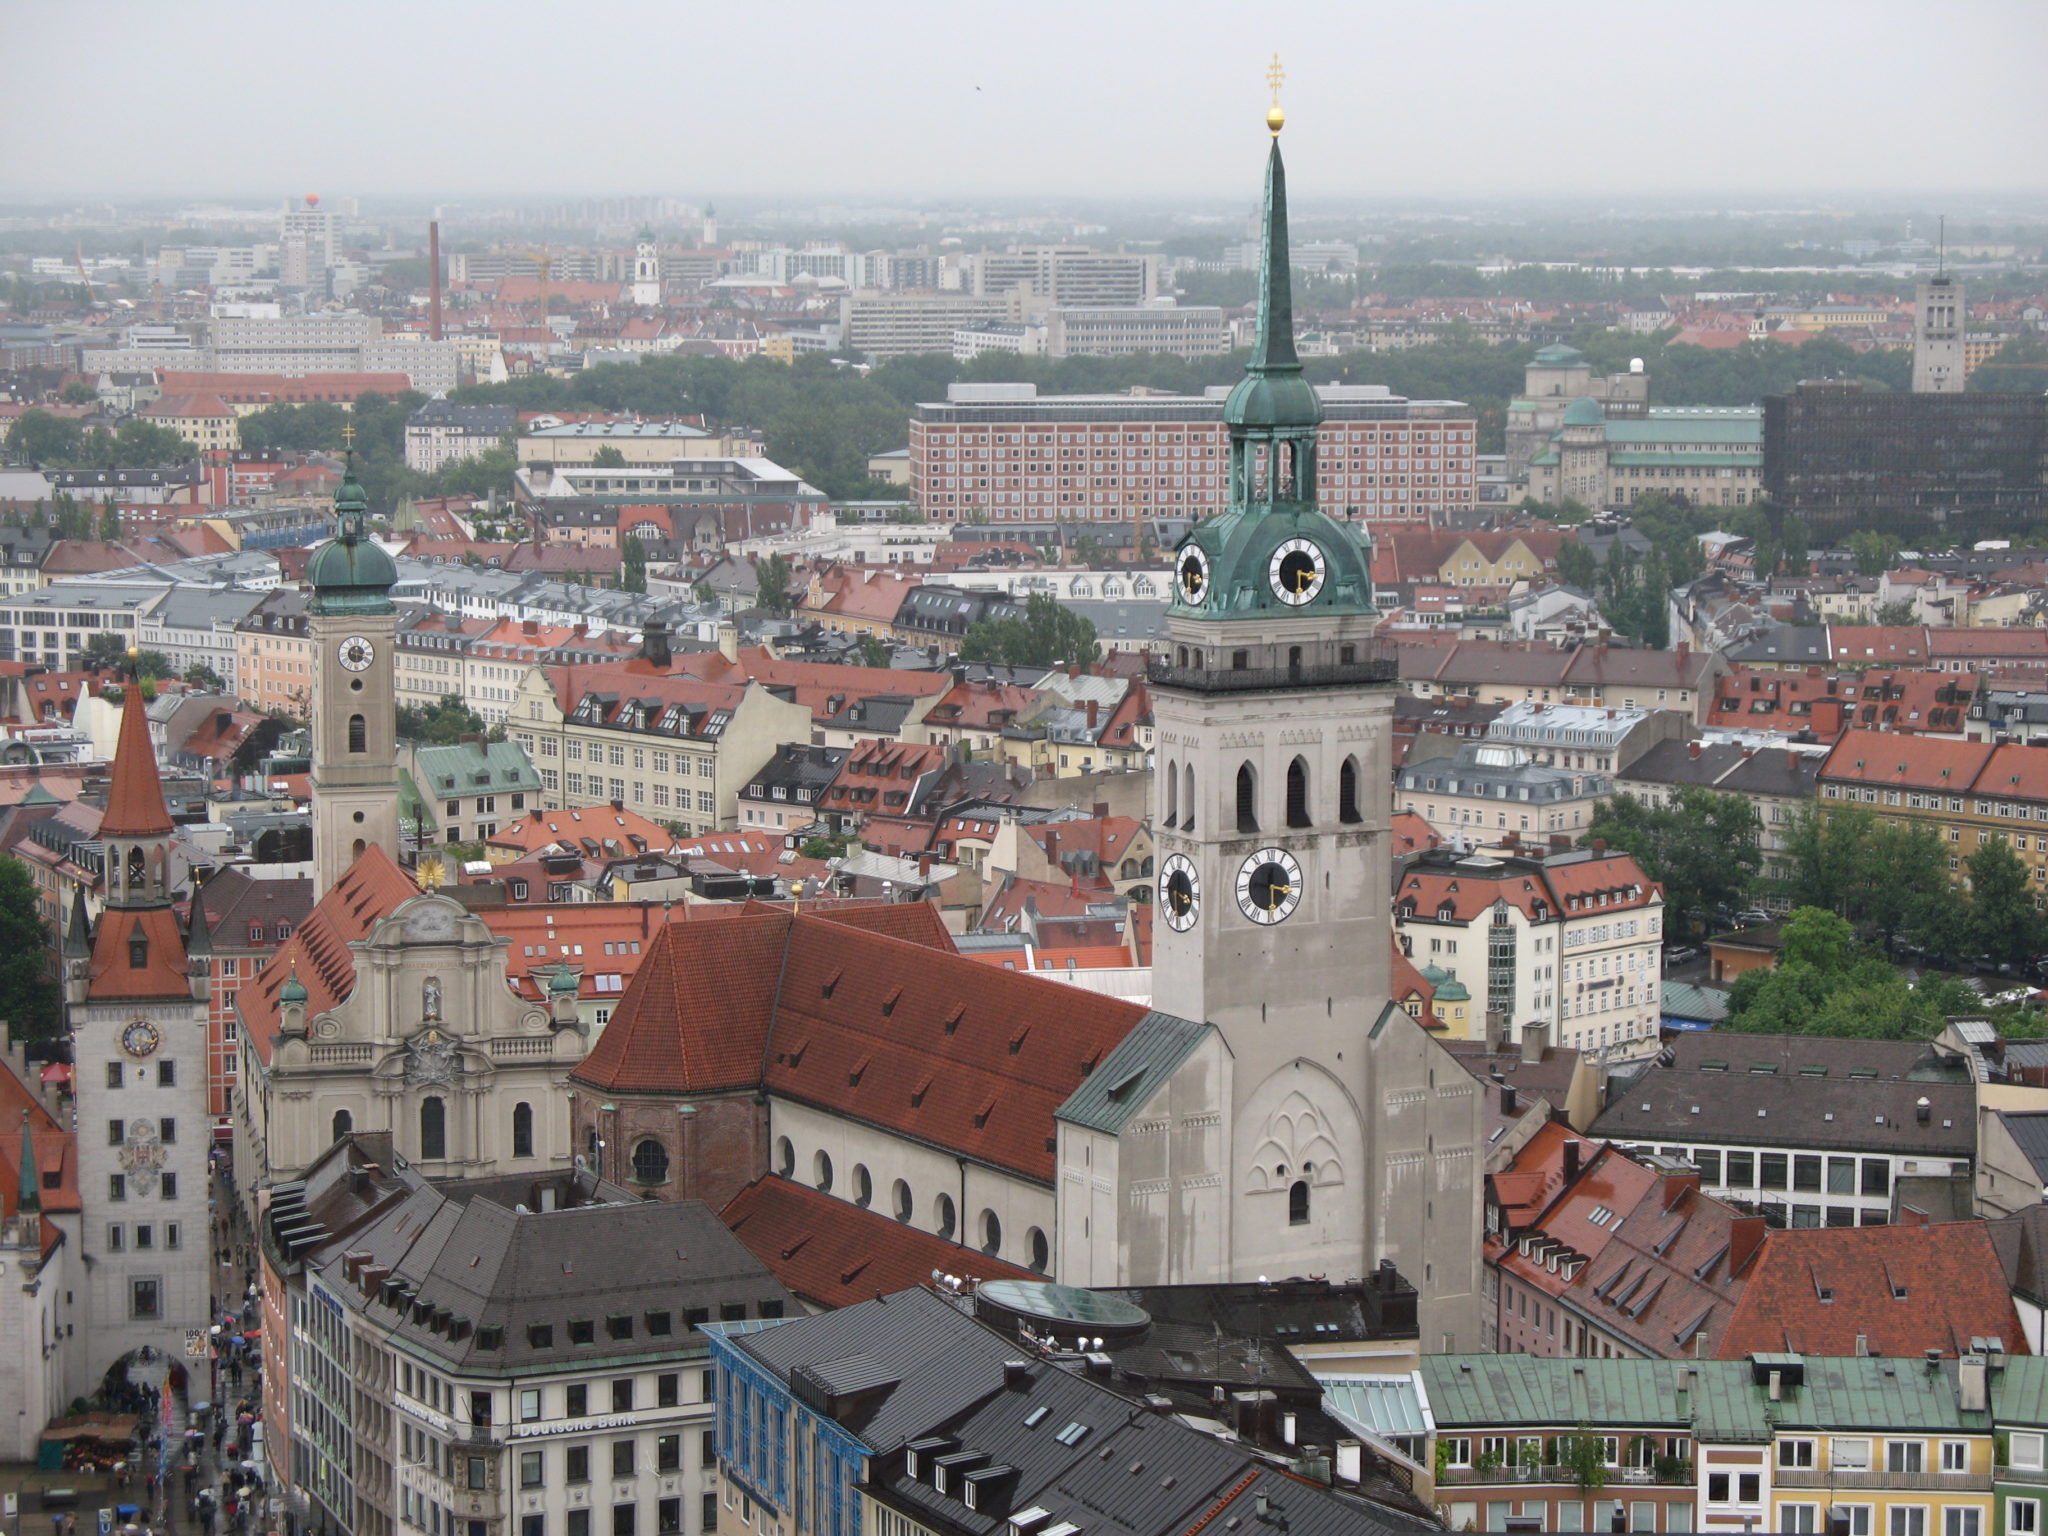 St. Peter's Church - Top 10 Things to See and Do in Munich, Germany